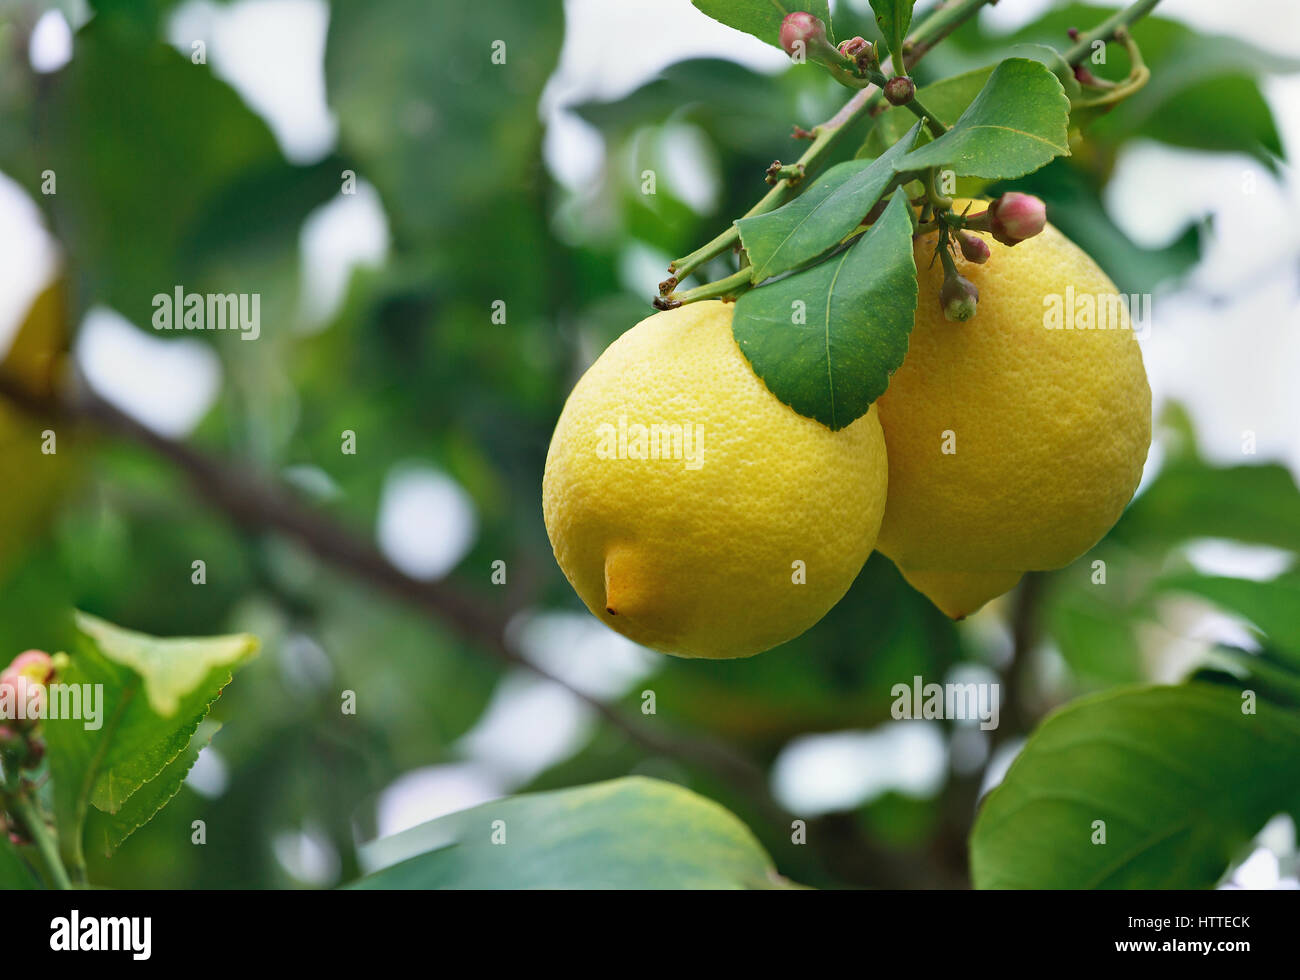 Lemons on a tree close-up in Israel Stock Photo